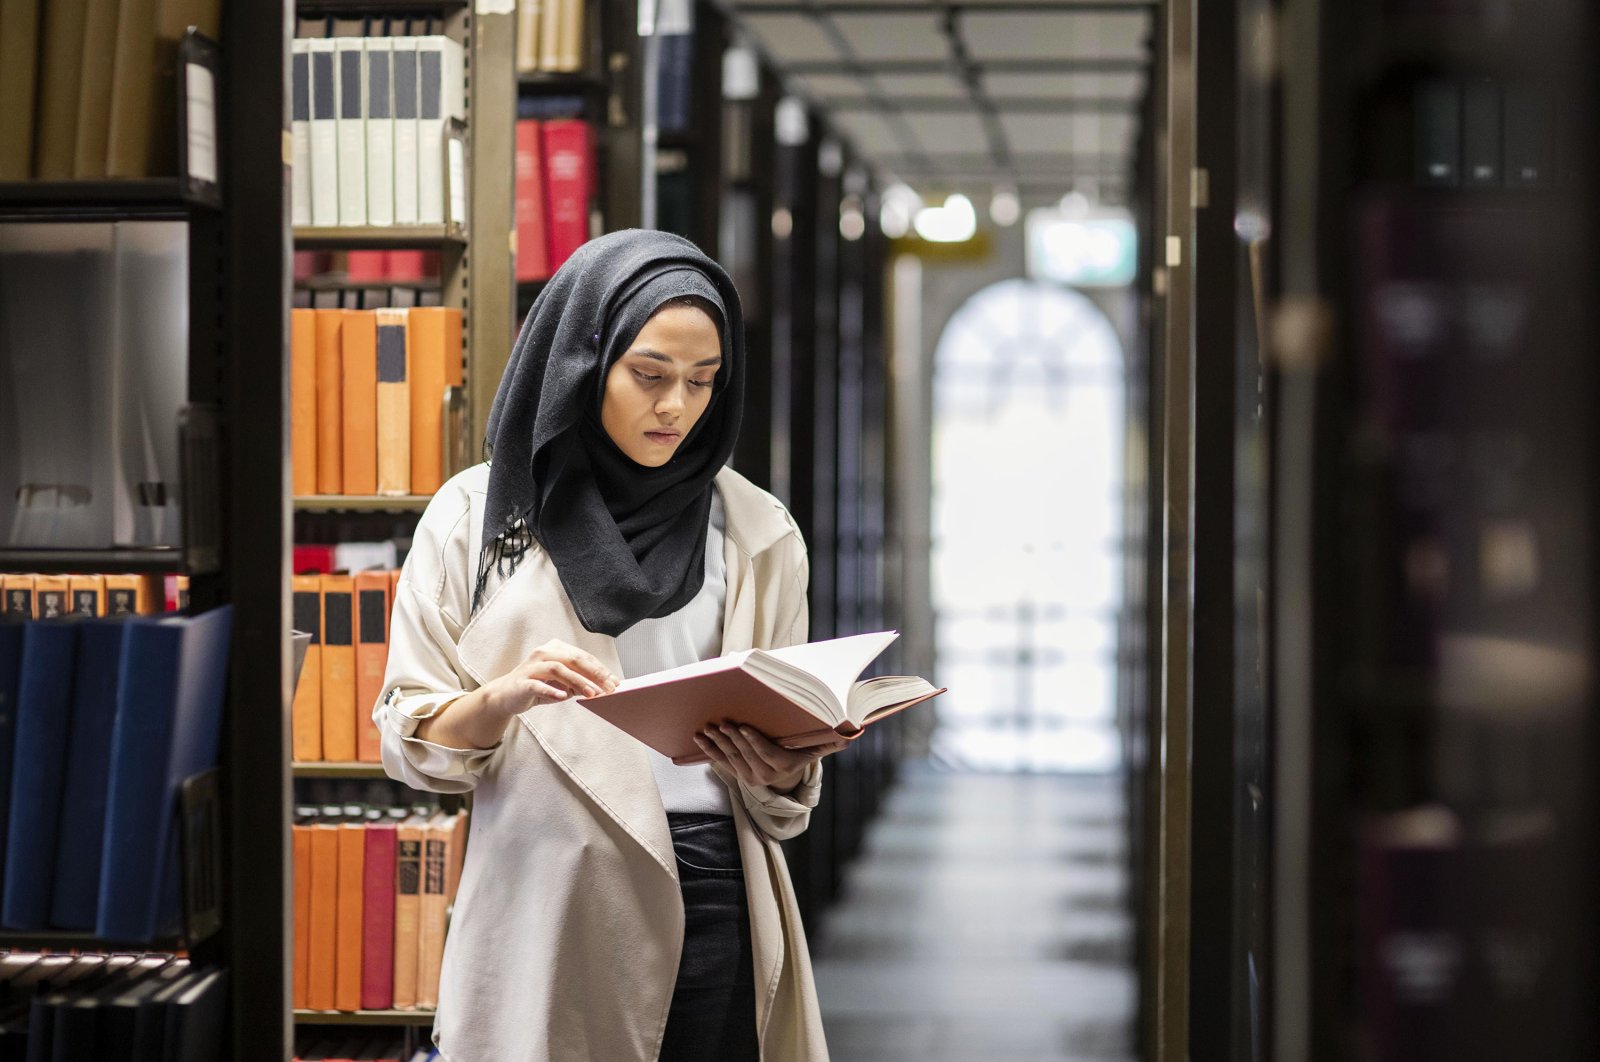 A woman wearing a headscarf reads a book. (Getty Images)